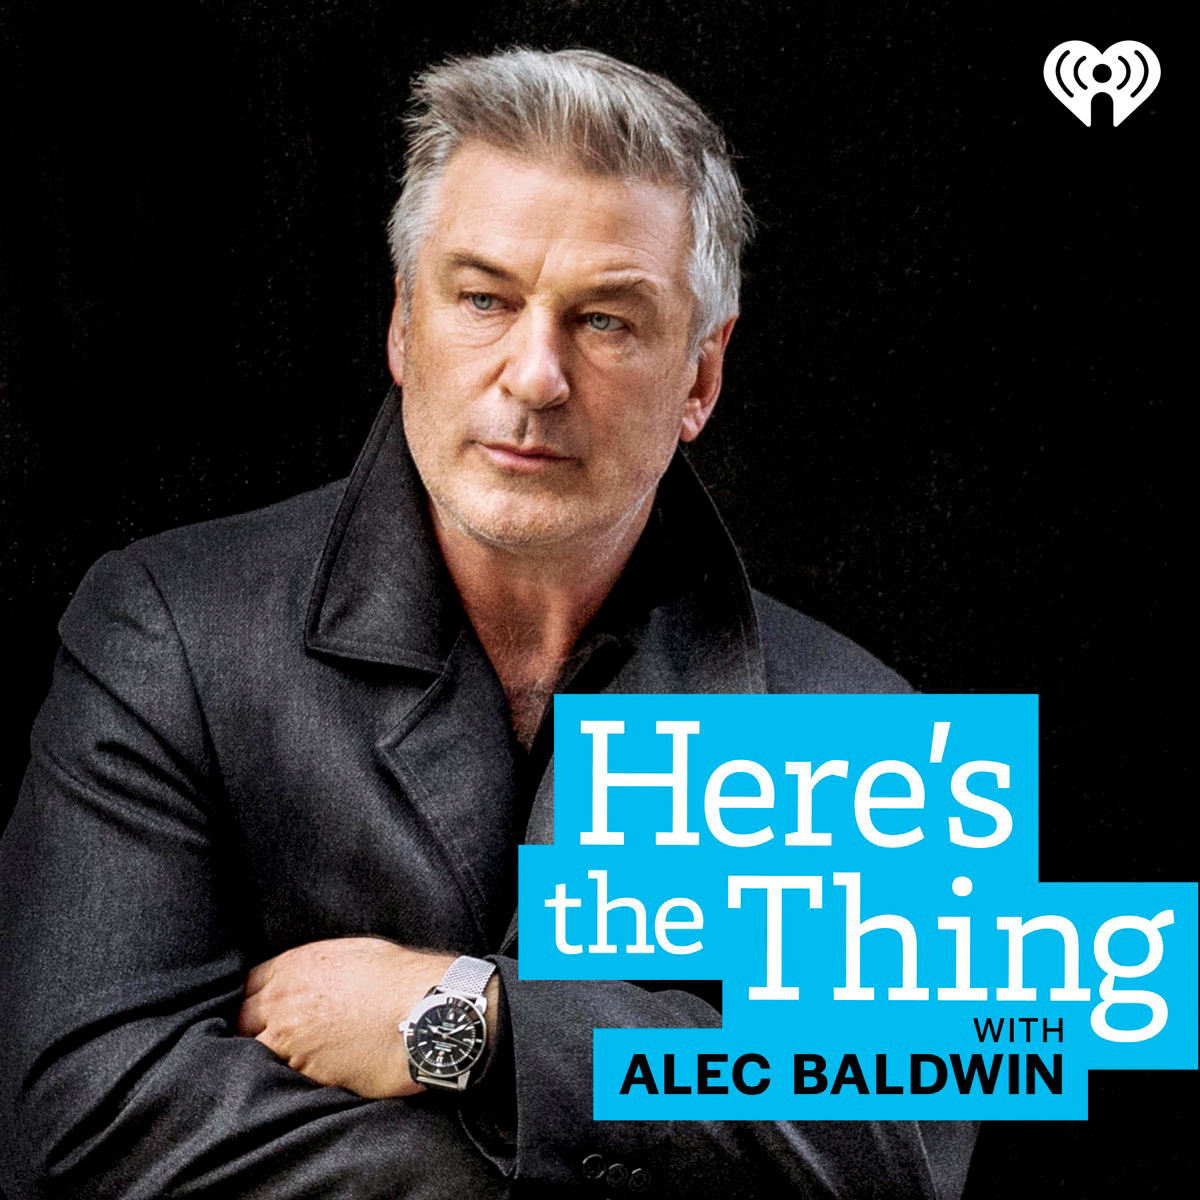 Alec Baldwin Here's the Thing